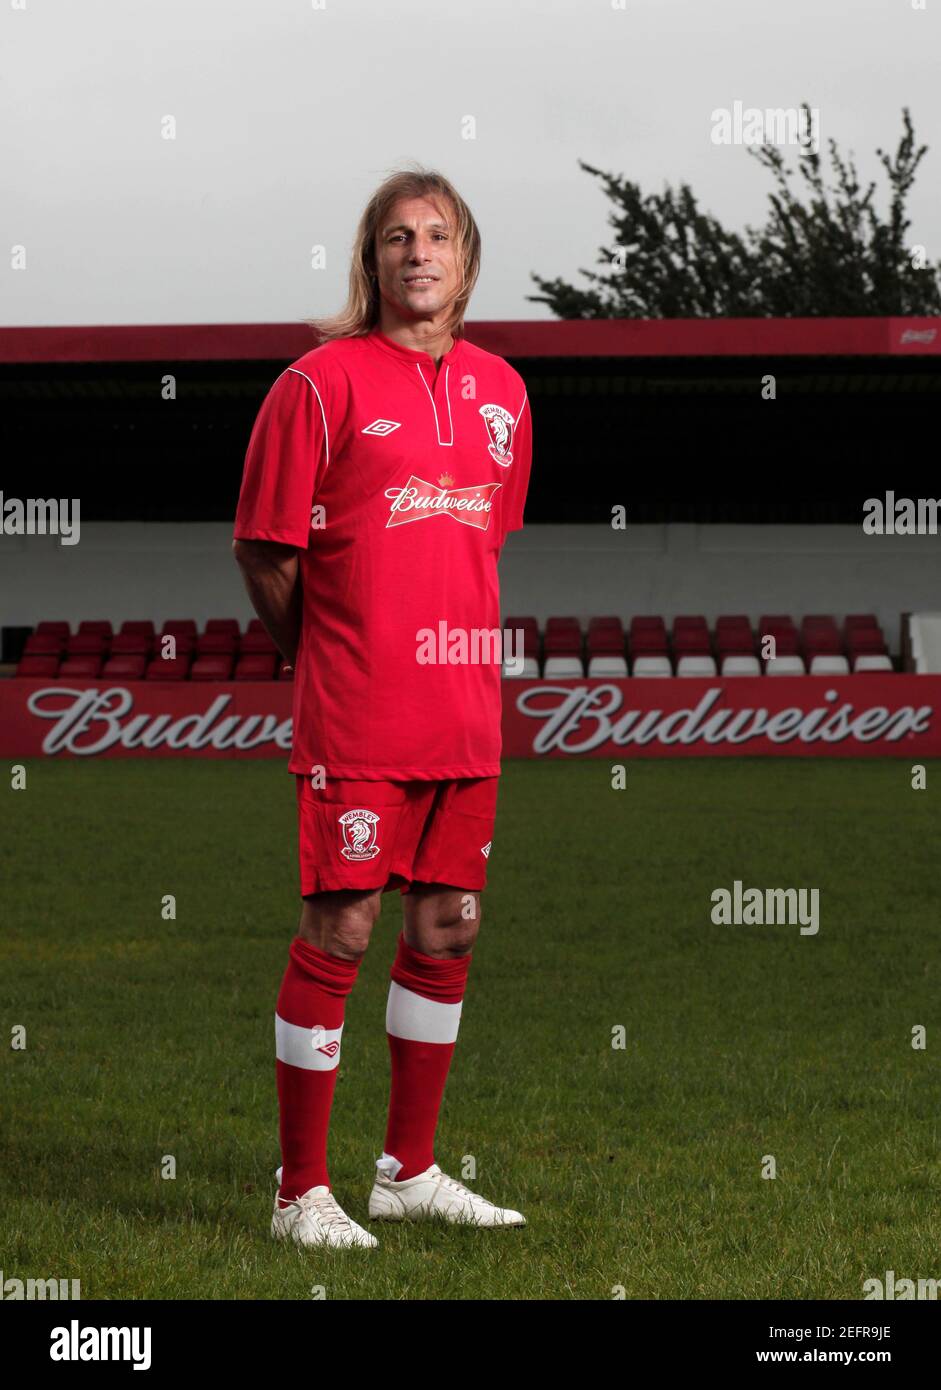 Football - Wembley FC Sign Up Football Legends and Announce Dream On TV  series - Wembley FC, Vale Farm - 21/6/12 Football legend Claudio Caniggia.  Along with Graeme Le Saux, Ray Parlour,